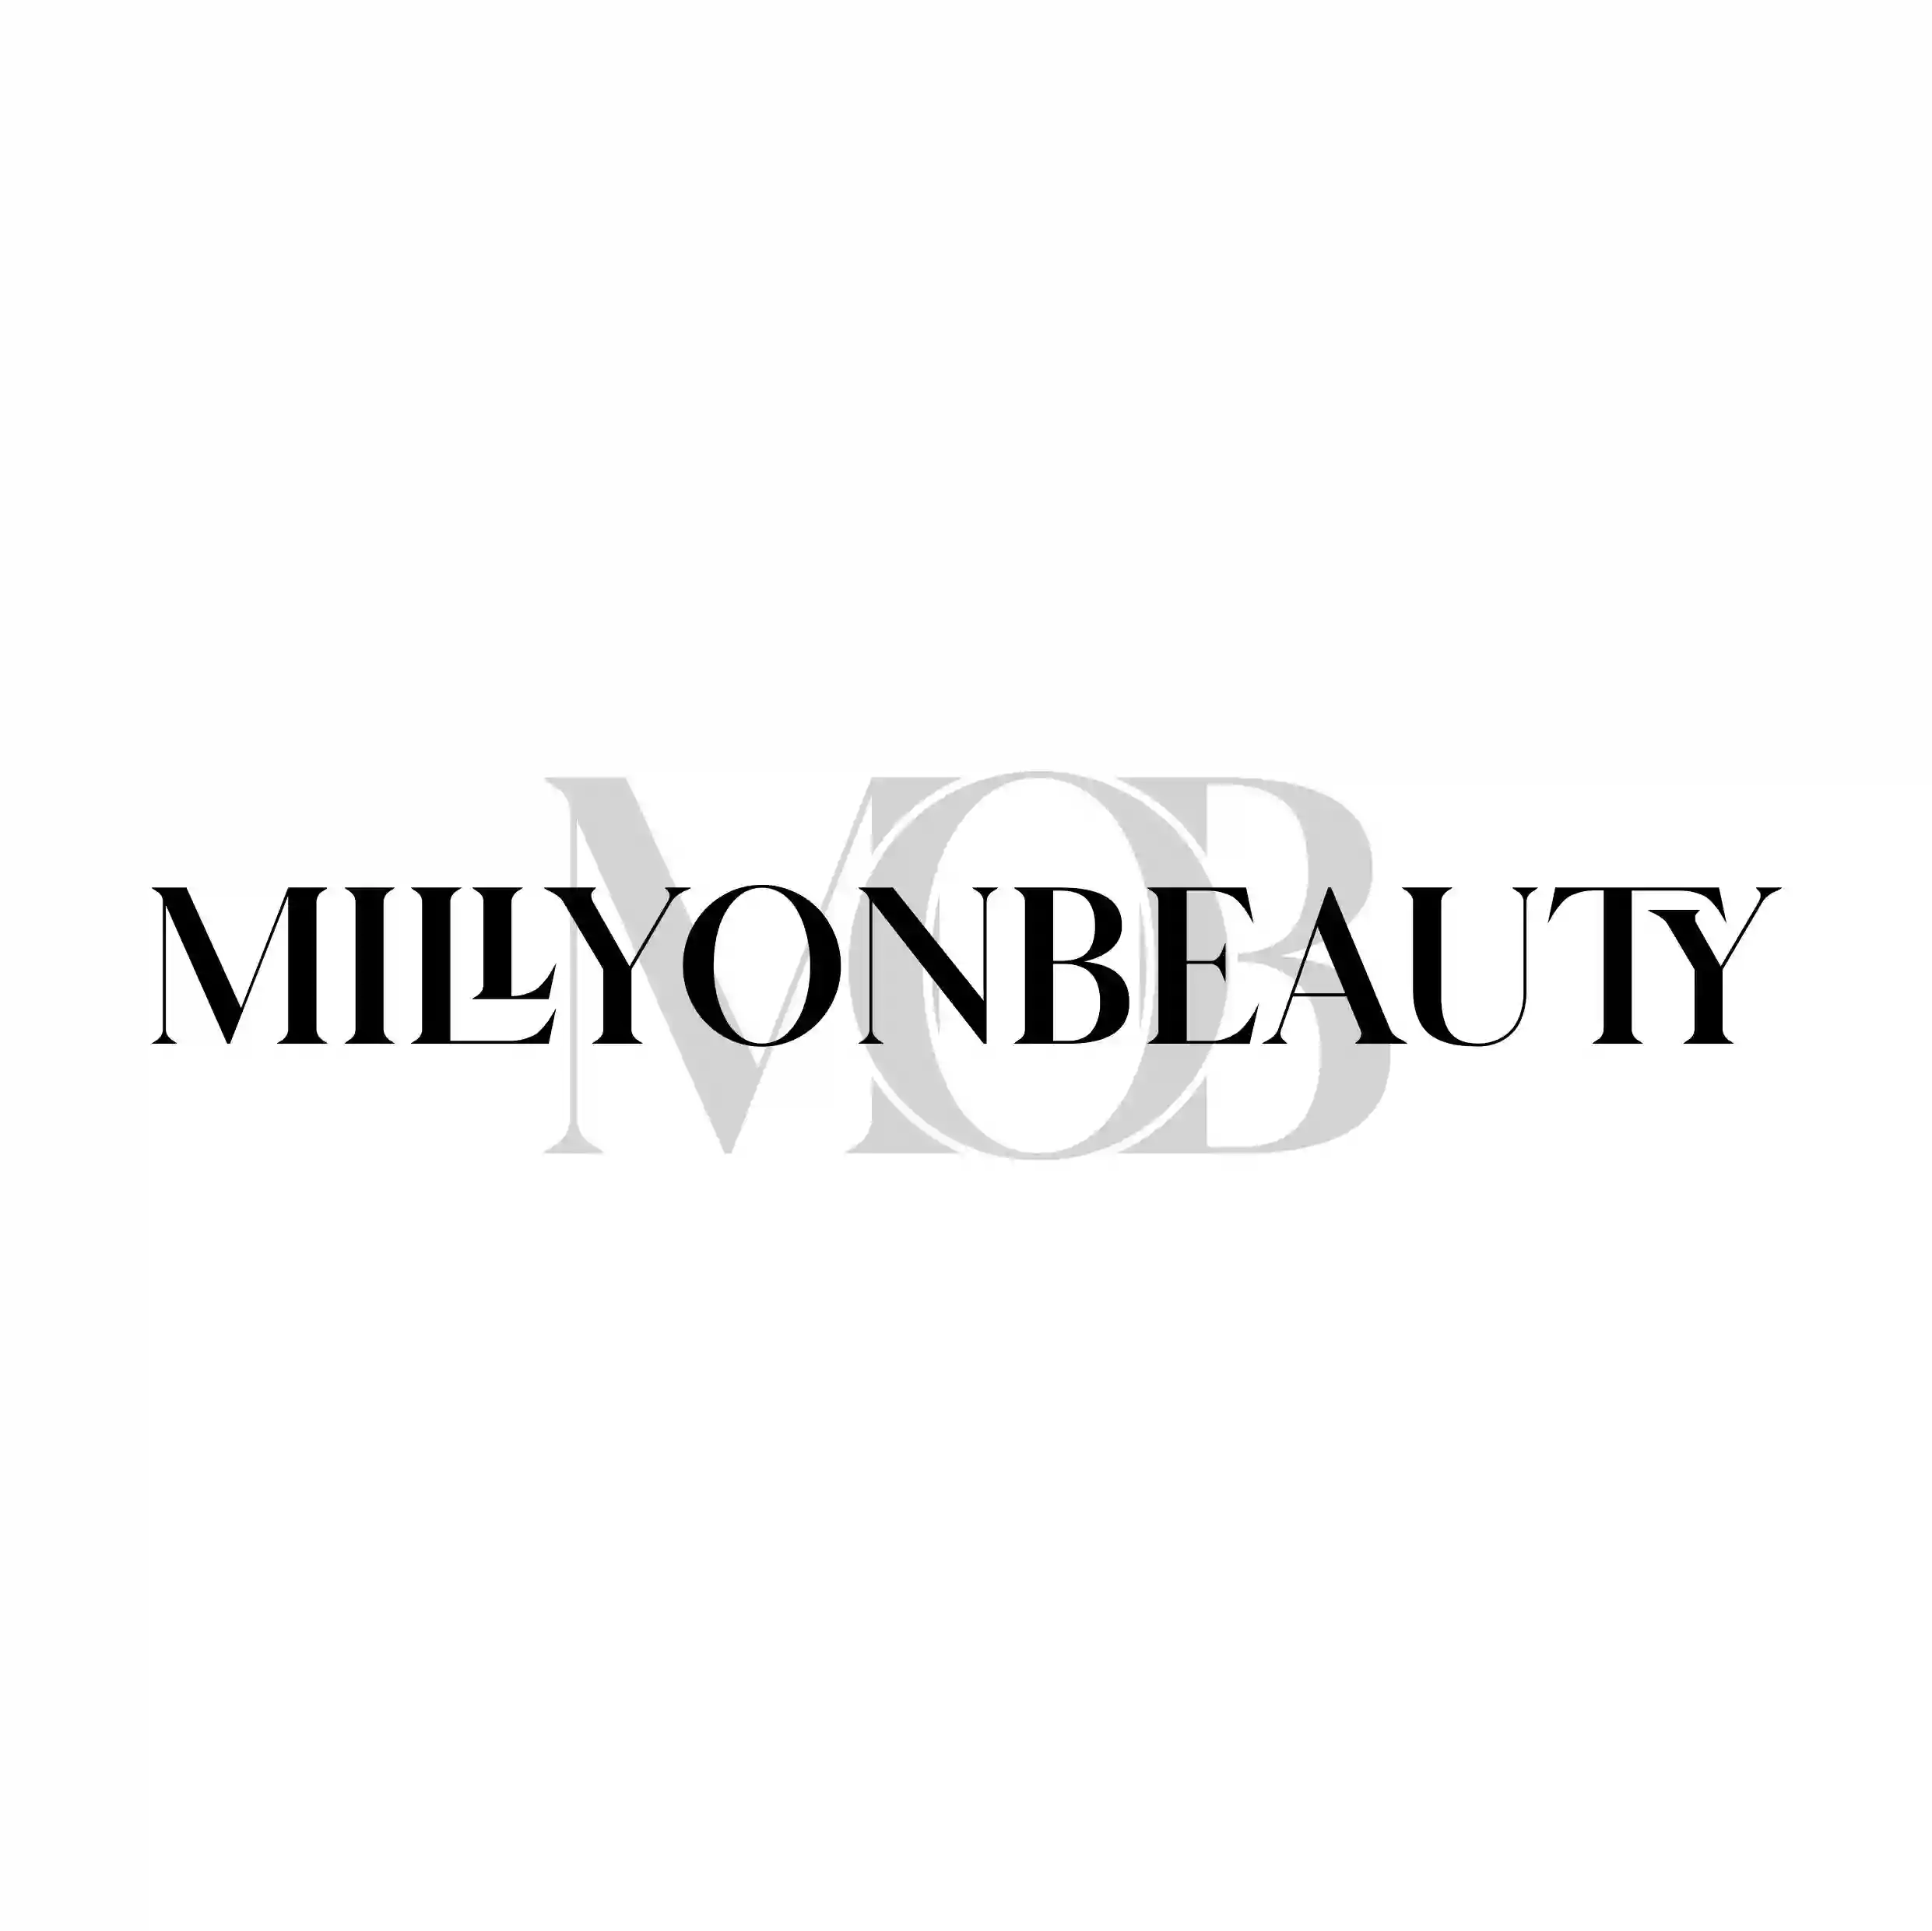 MillyOnBeauty | Tampa Eyelash Extensions & Brows